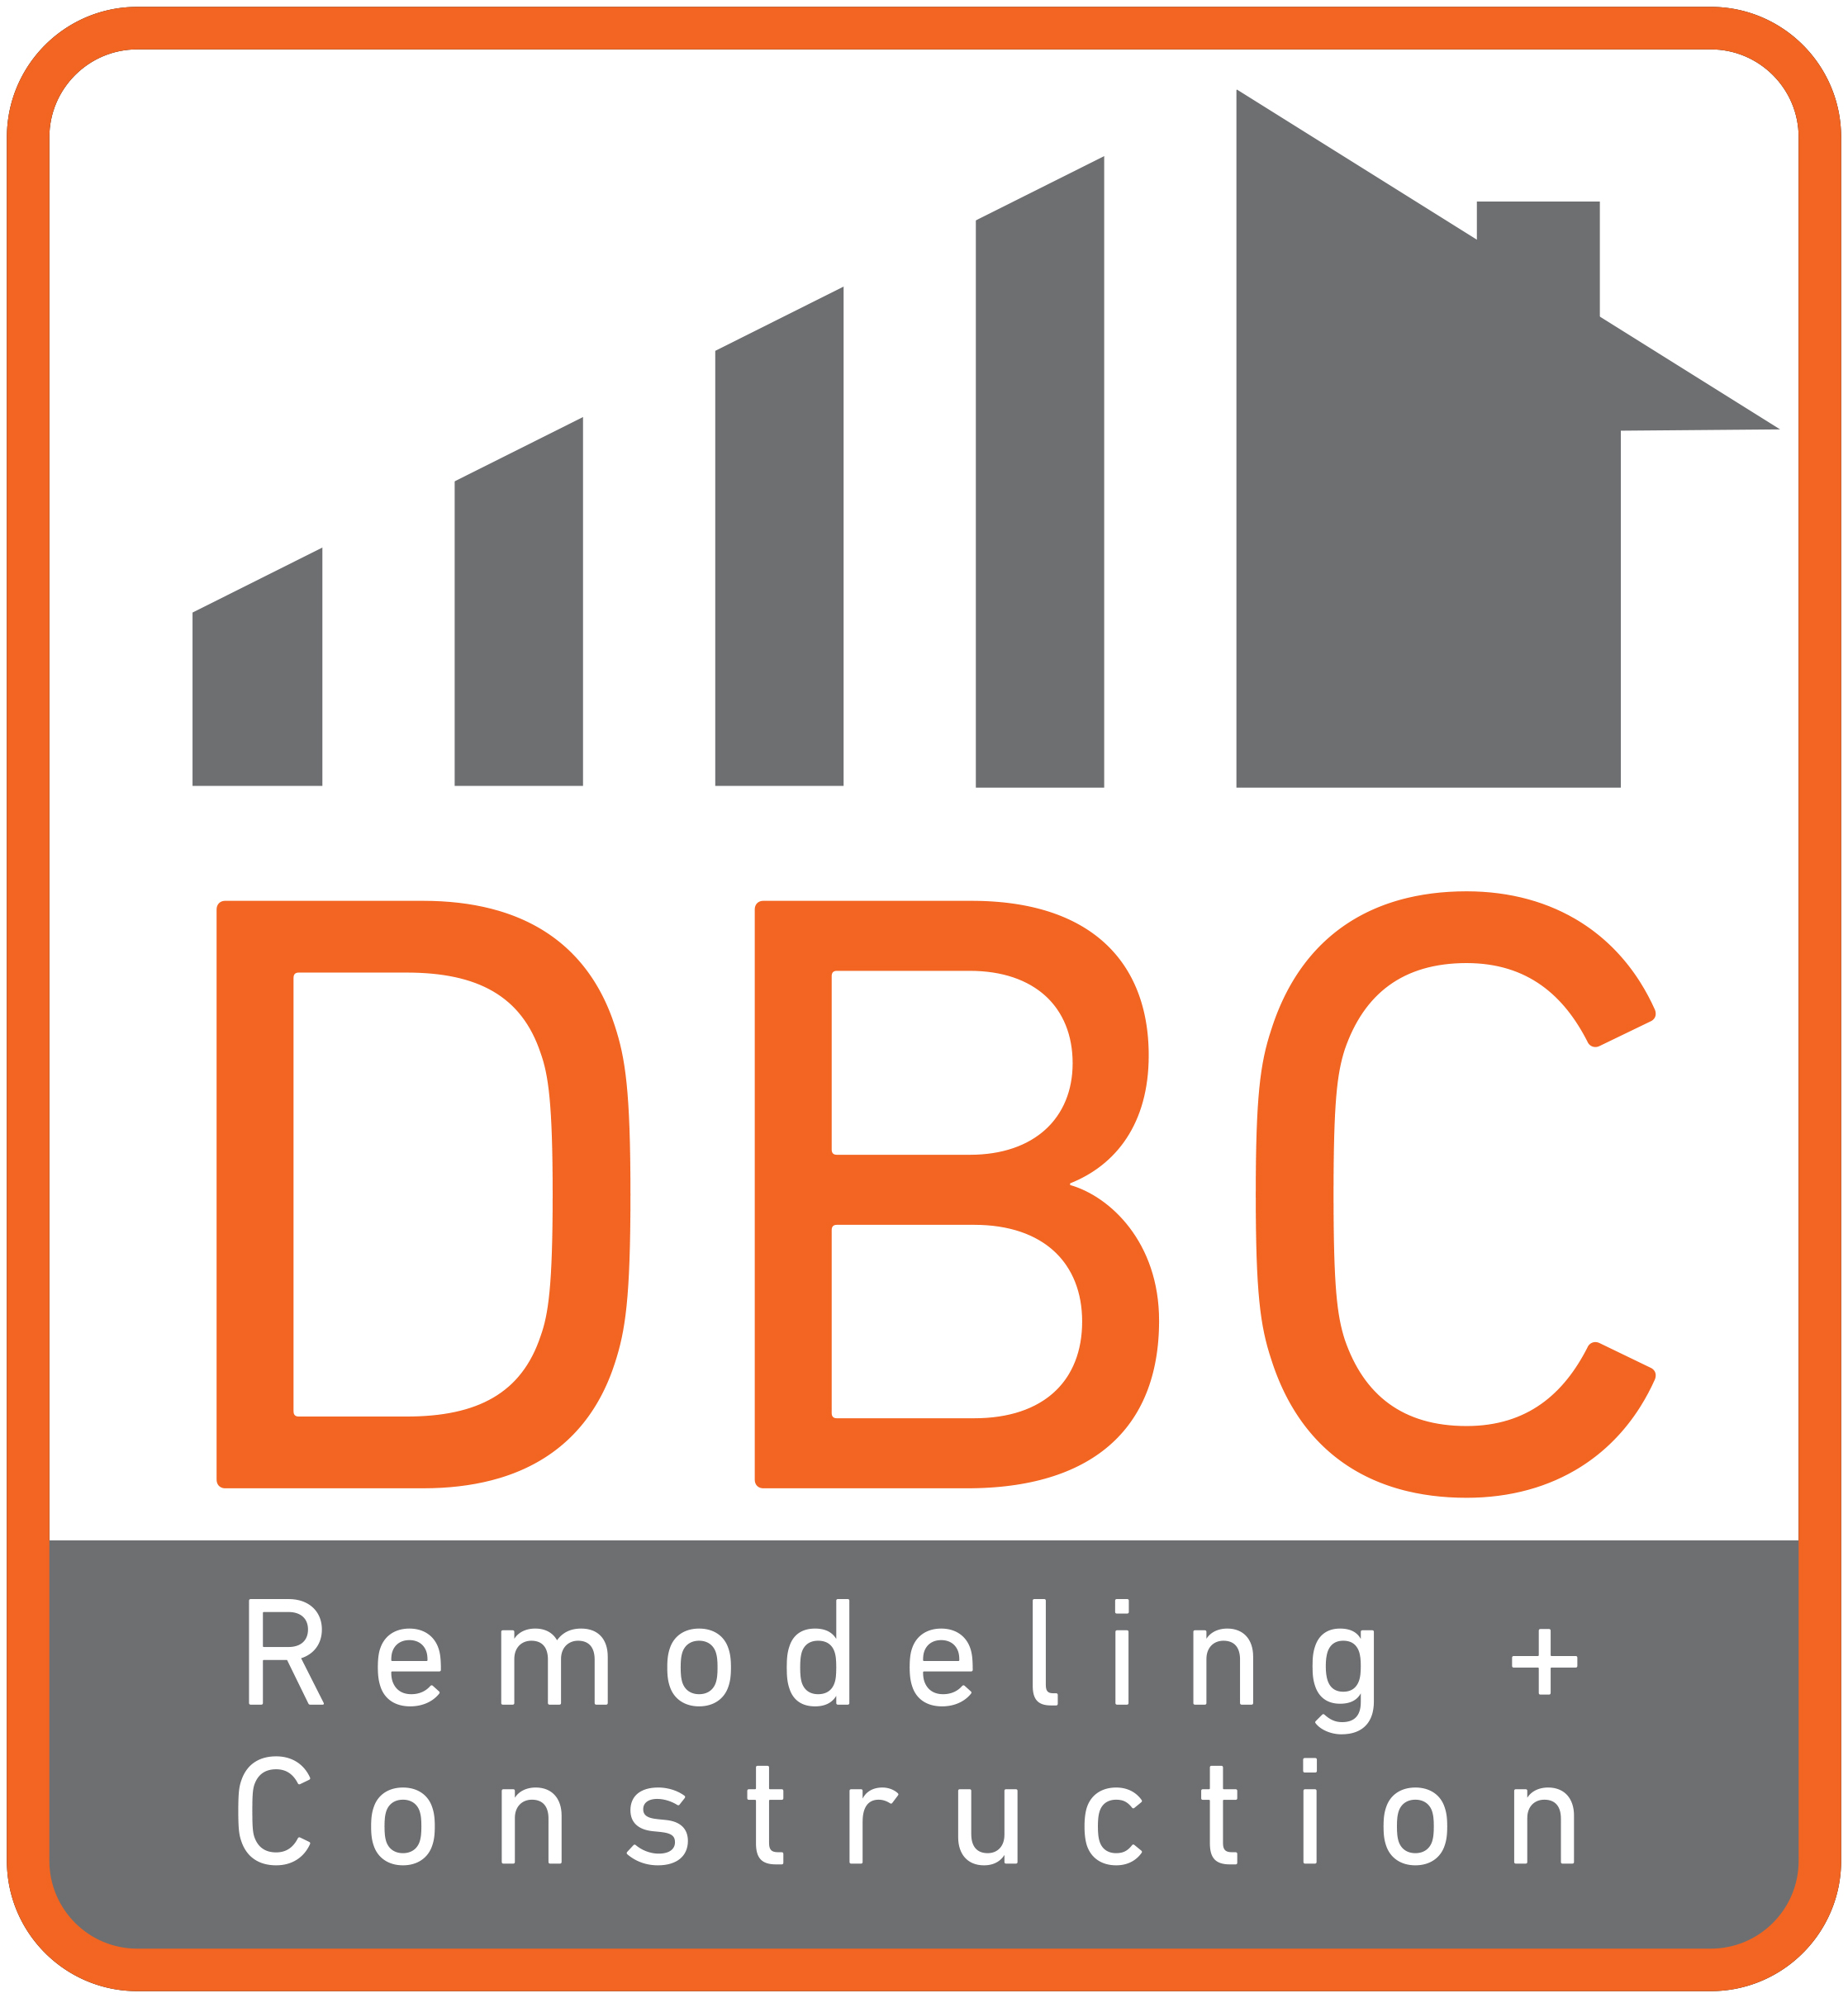 DBC Remodeling + Construction